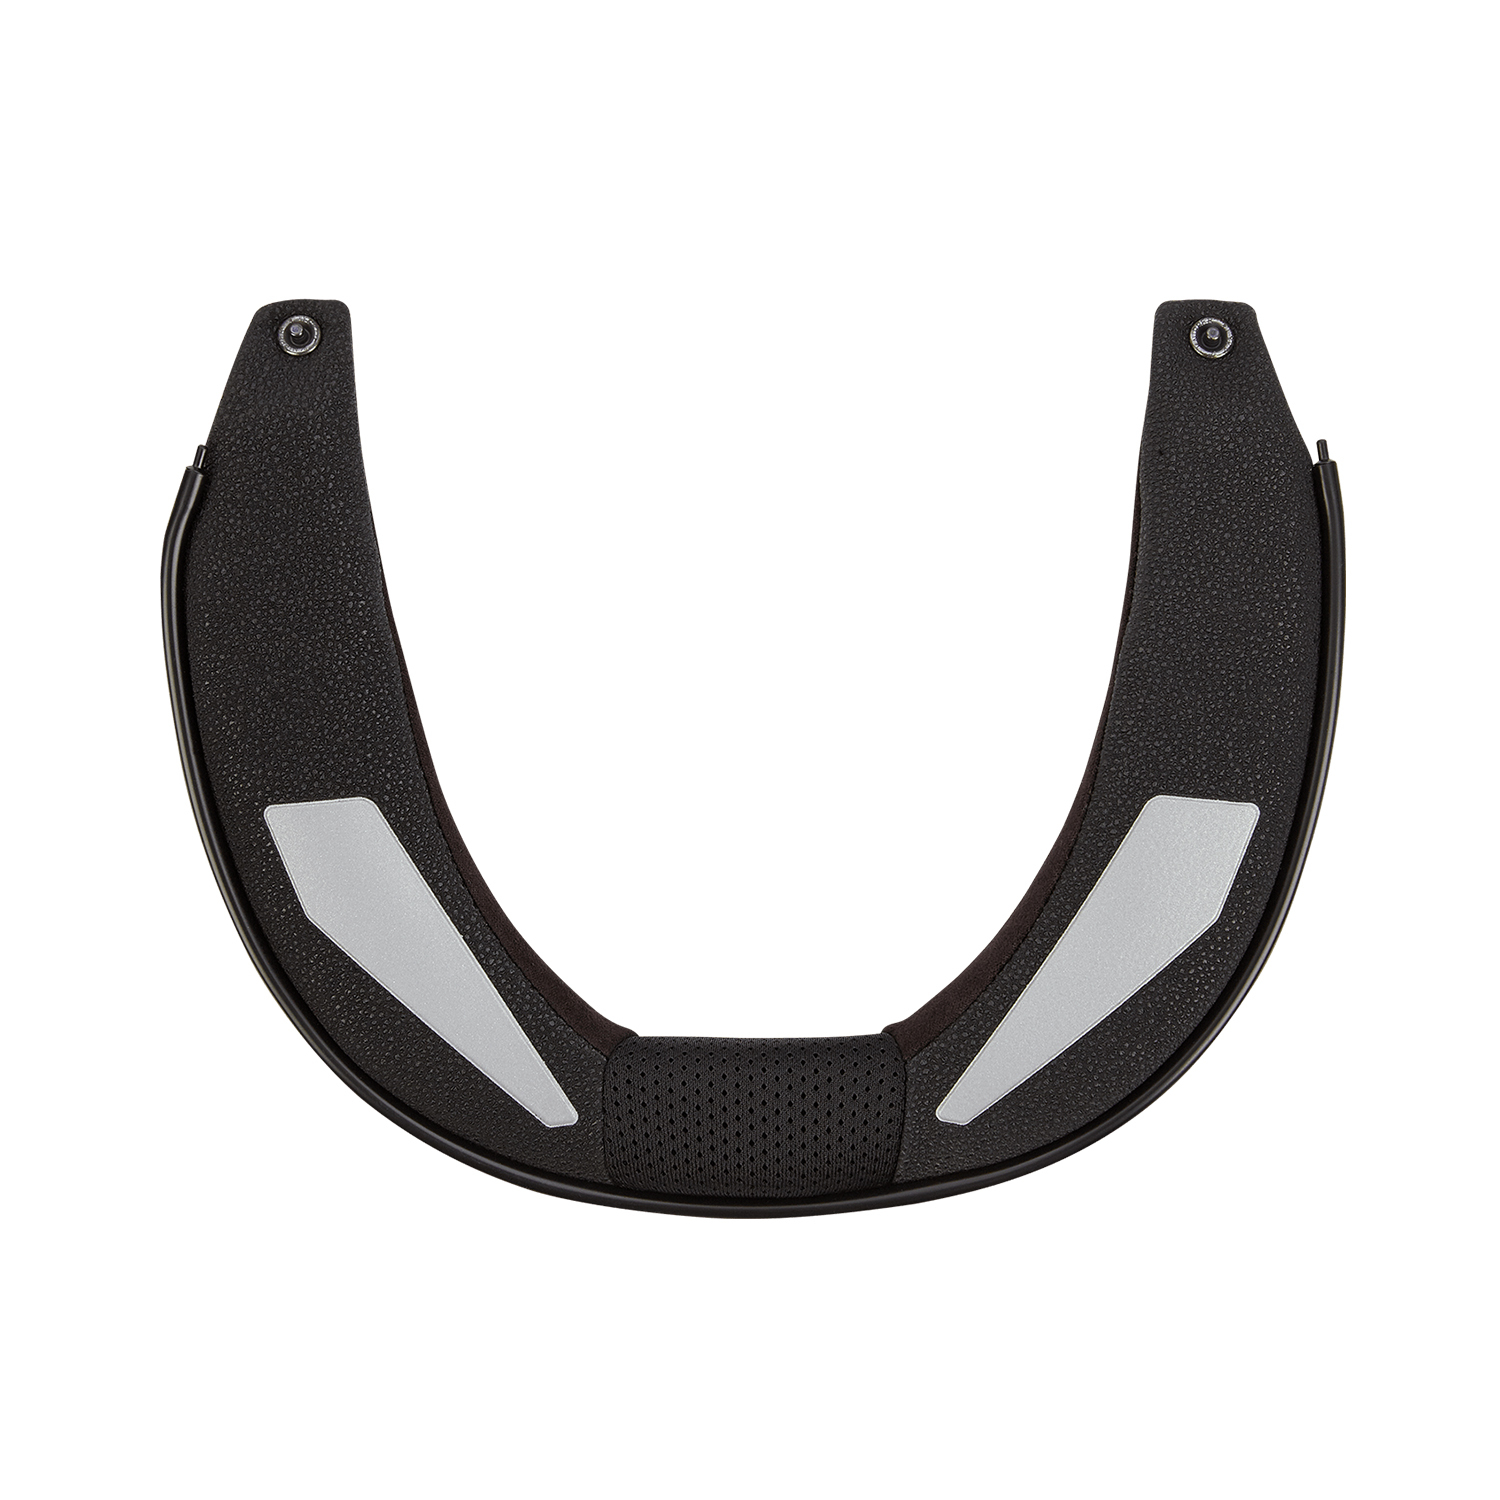 Schuberth E1 Neck Pad - Available in Various Sizes